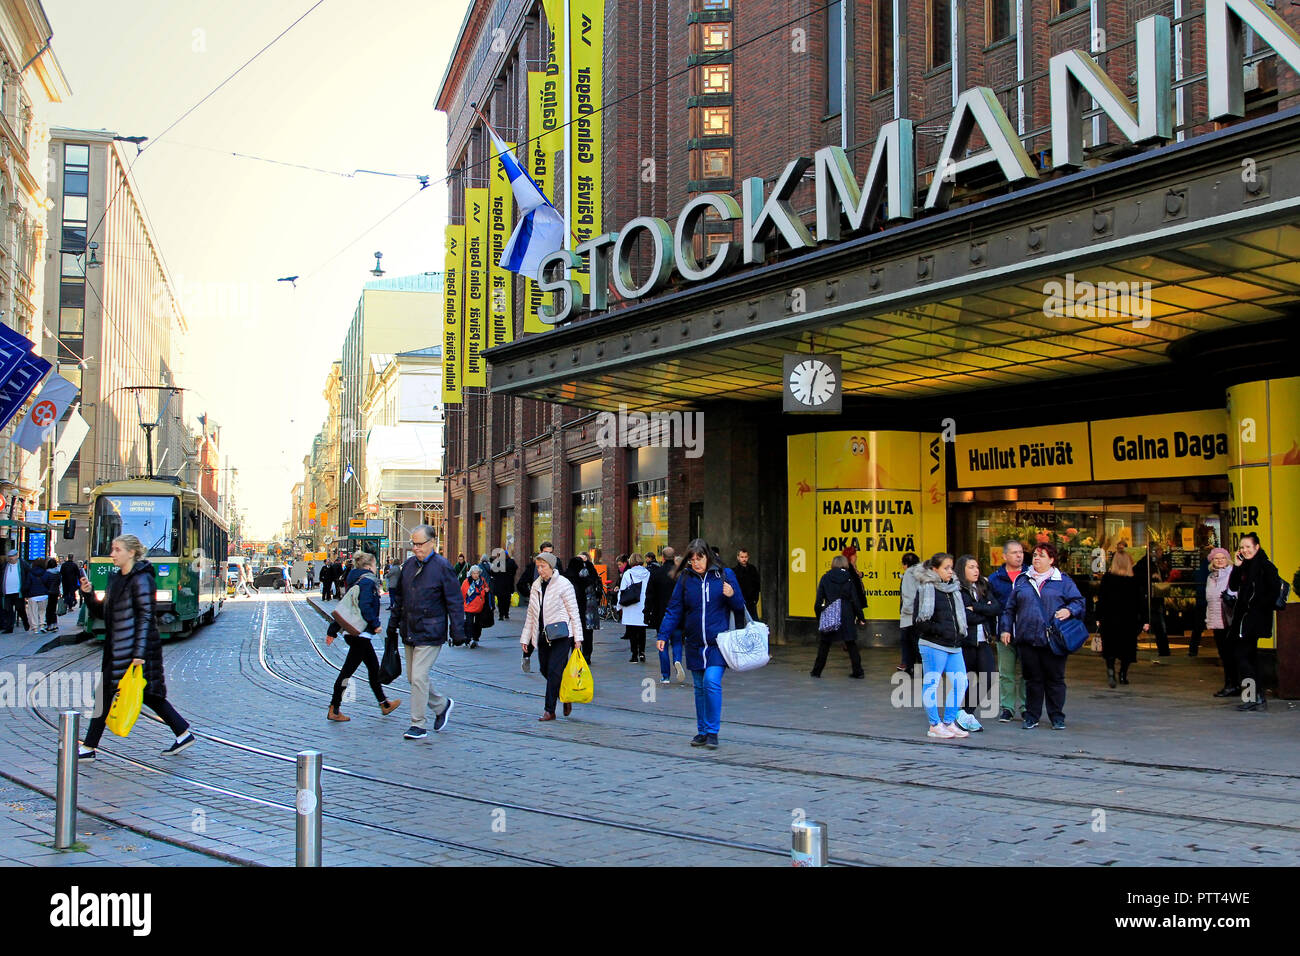 Helsinki, Finland - October 10, 2018: Crazy Days, the biannual, massive and popular 5-day sale event at Stockmann's flagship store in Helsinki begins. Credit: Taina Sohlman/ Alamy Live News Stock Photo